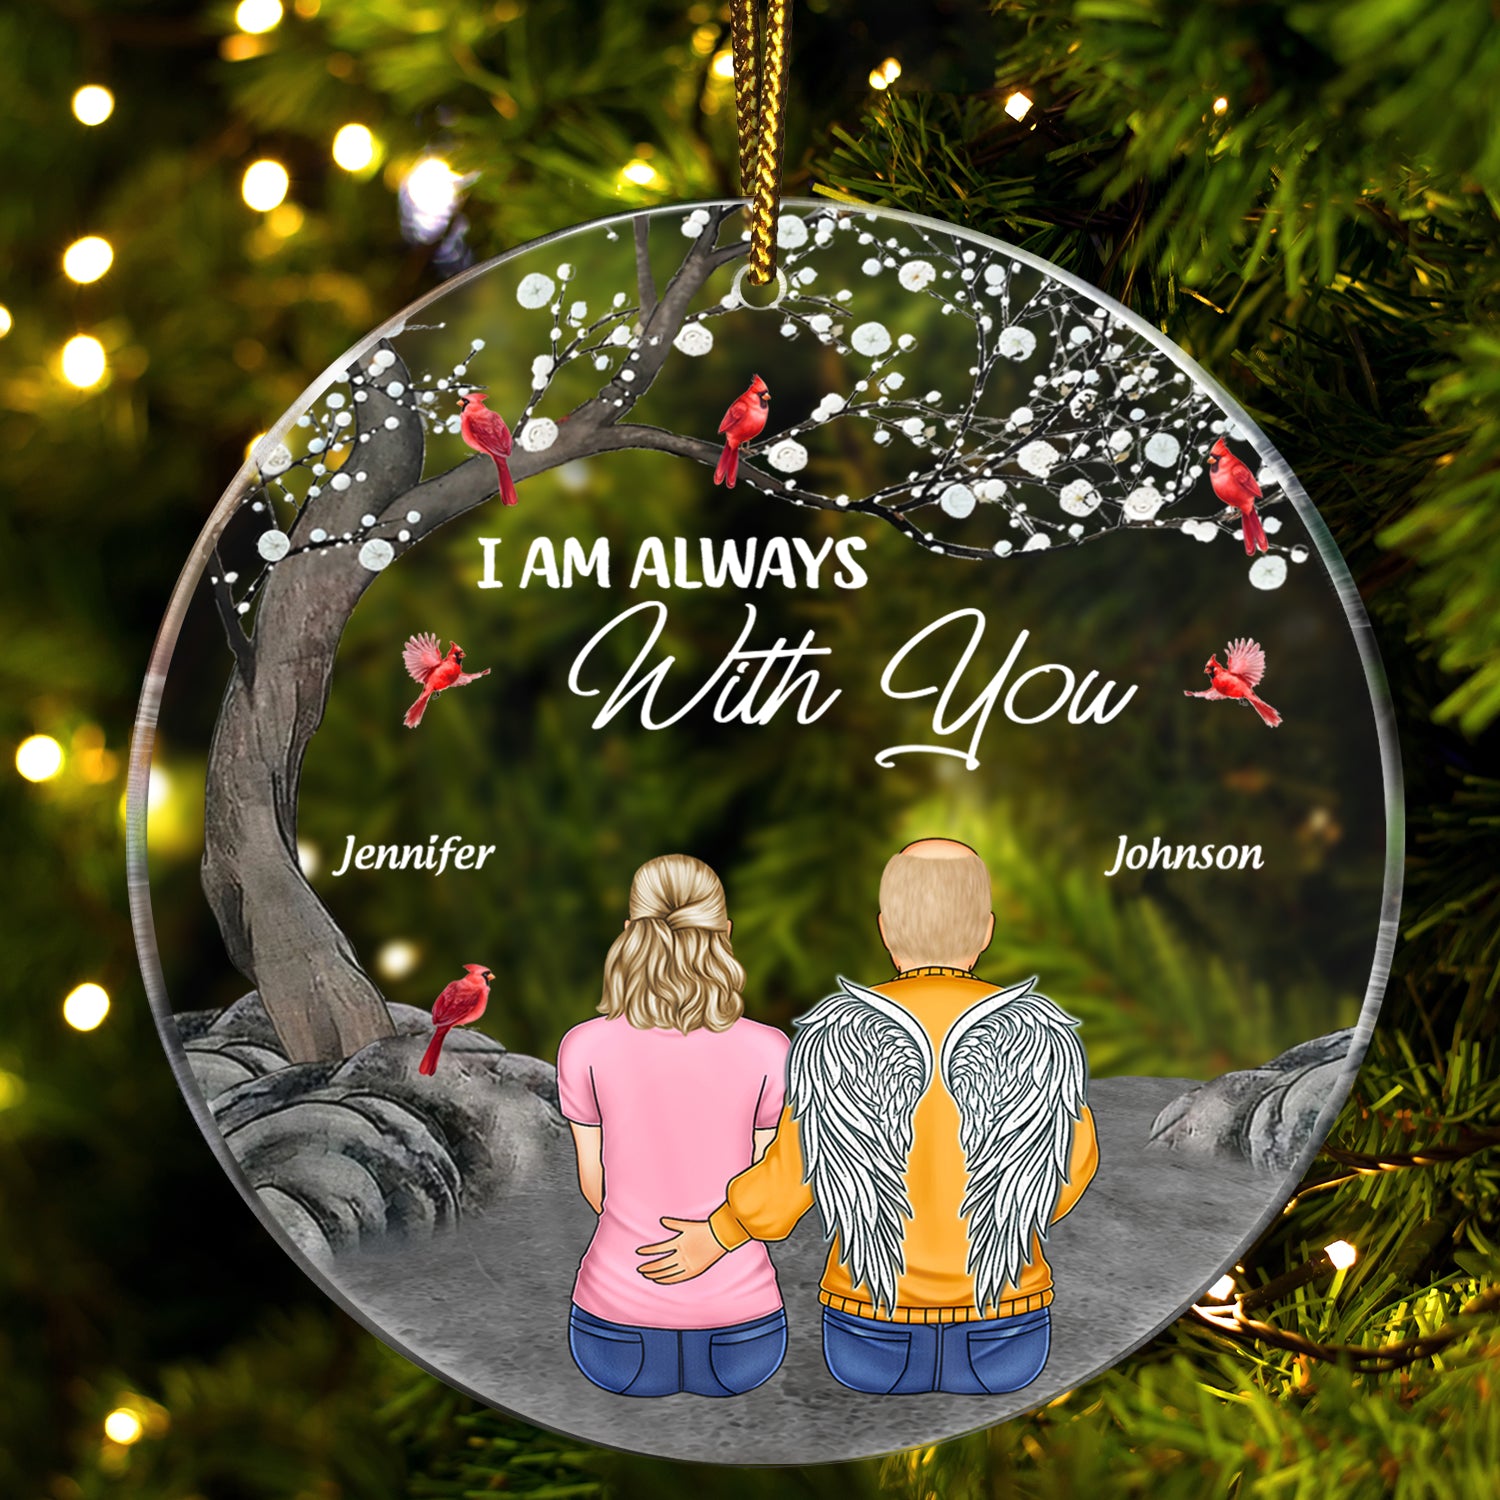 I'm Always With You - Sympathy Christmas Gift For Family - Personalized Circle Acrylic Ornament